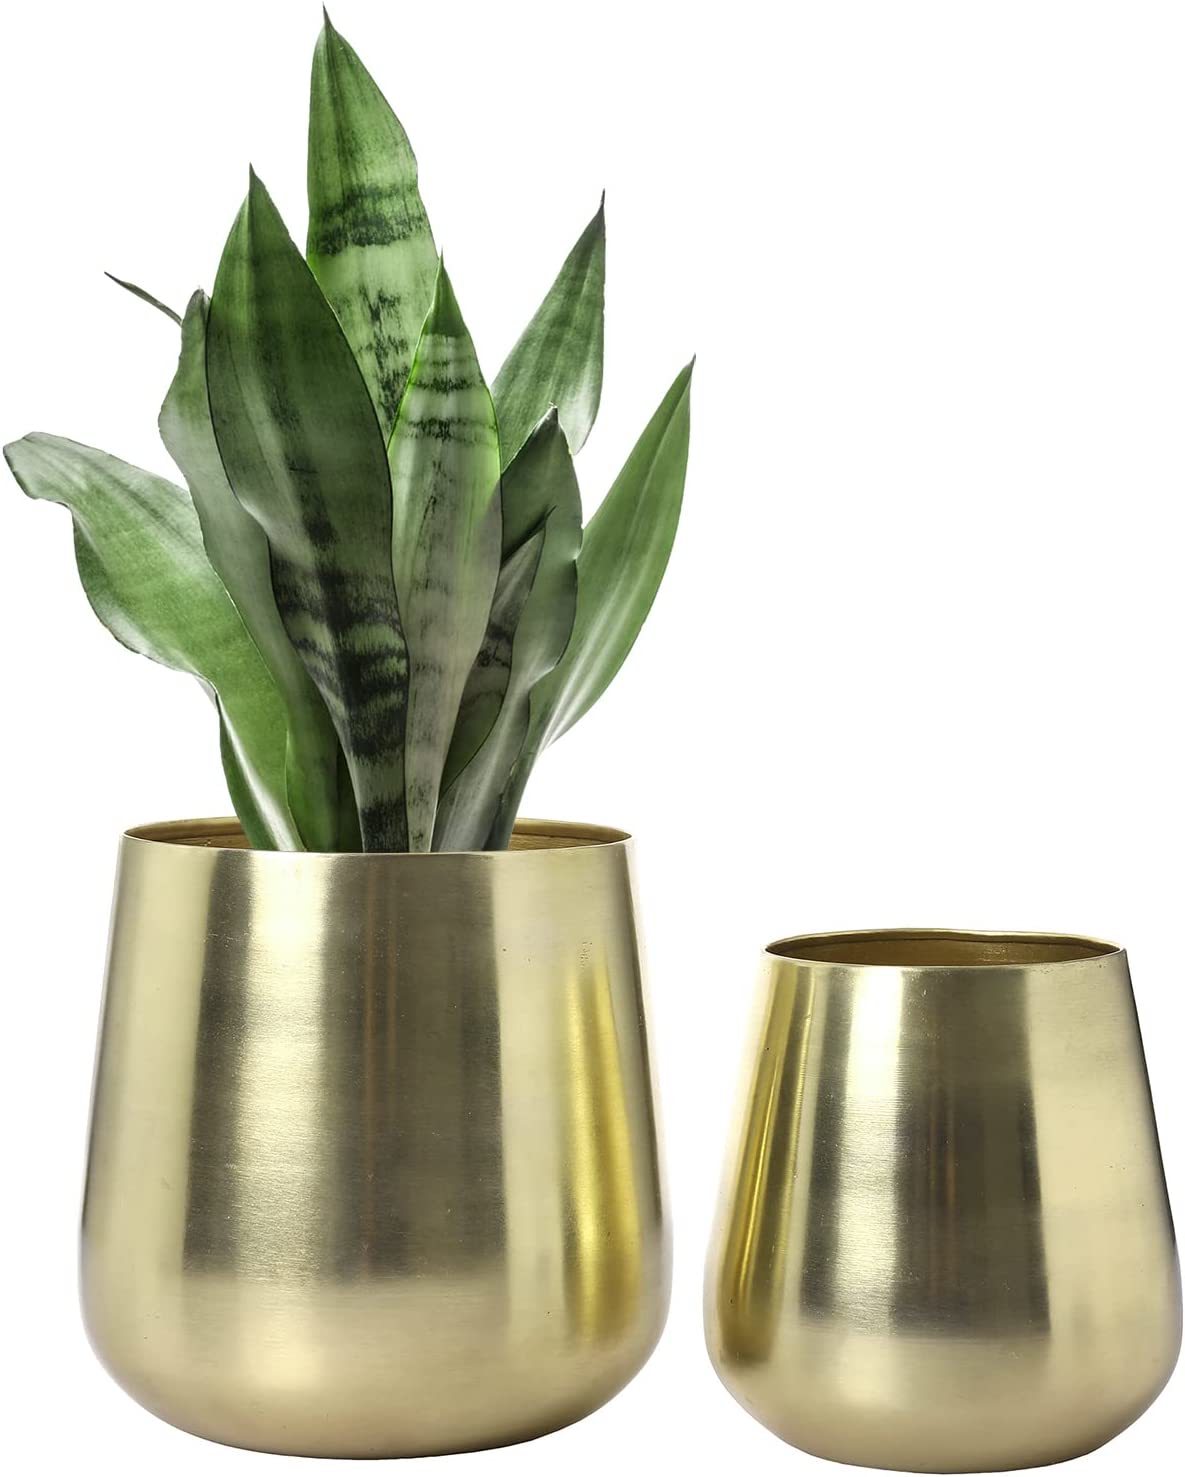 Mygift Modern Brass Brushed Metal Vase With Tapered Top,, Handmade In India - $36.99